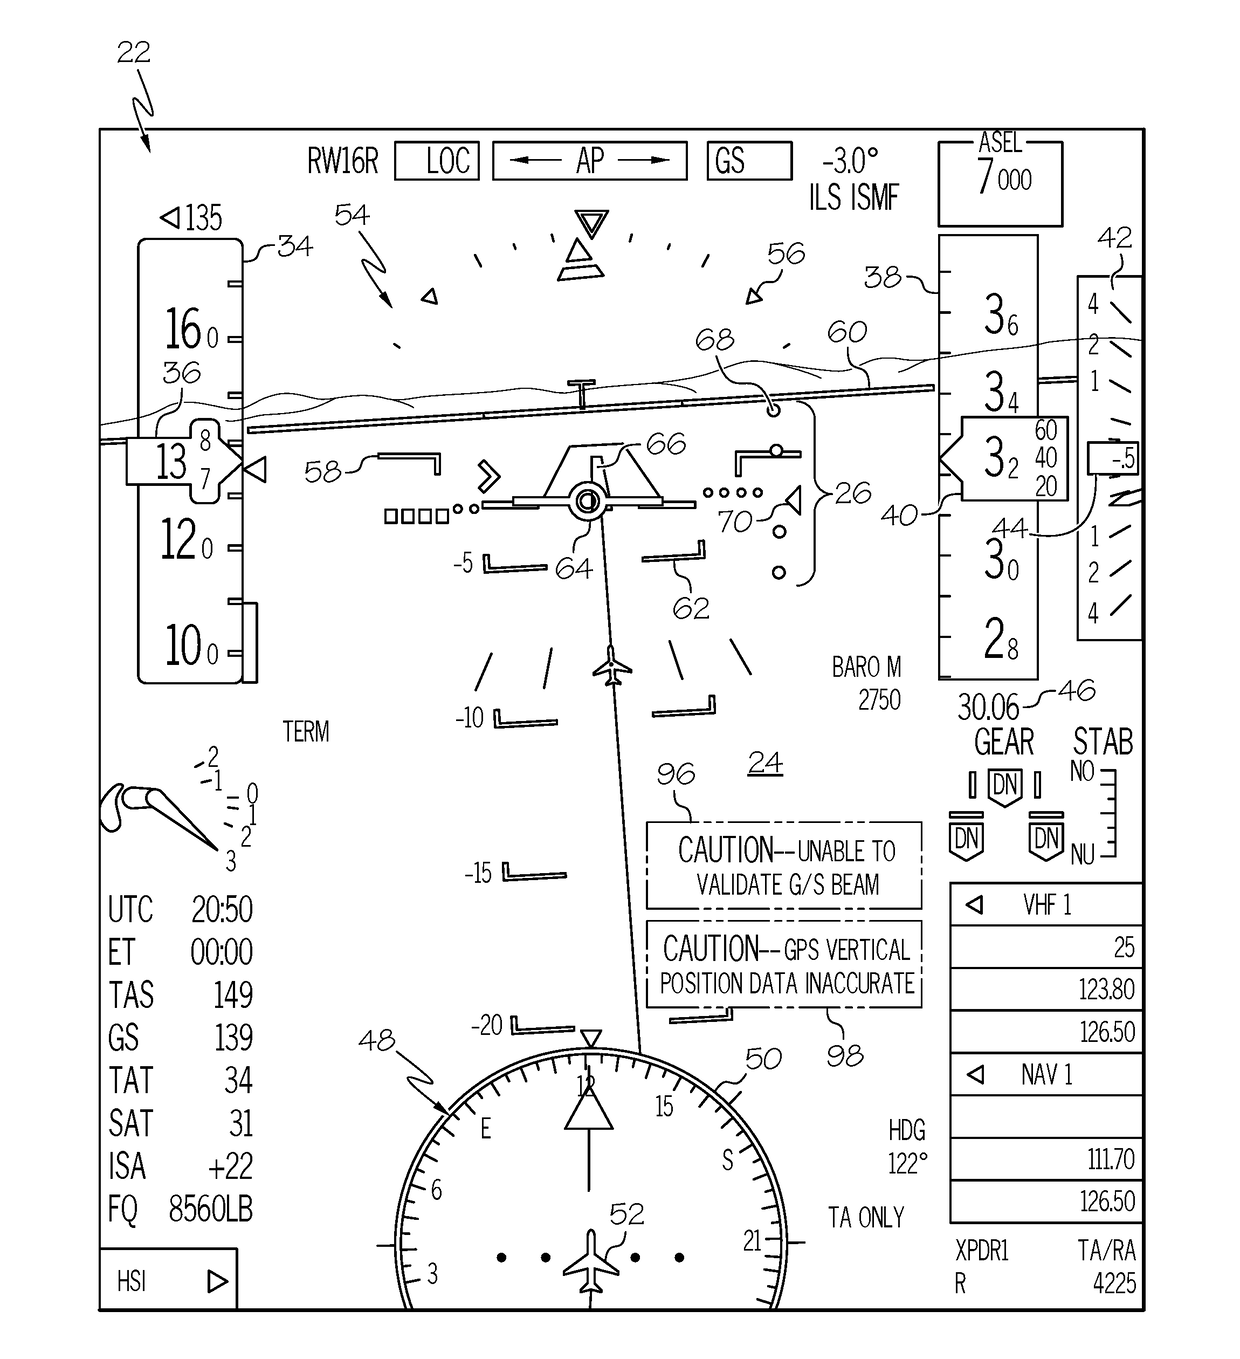 Cockpit display systems and methods for performing glide slope validation processes during instrument landing system approaches